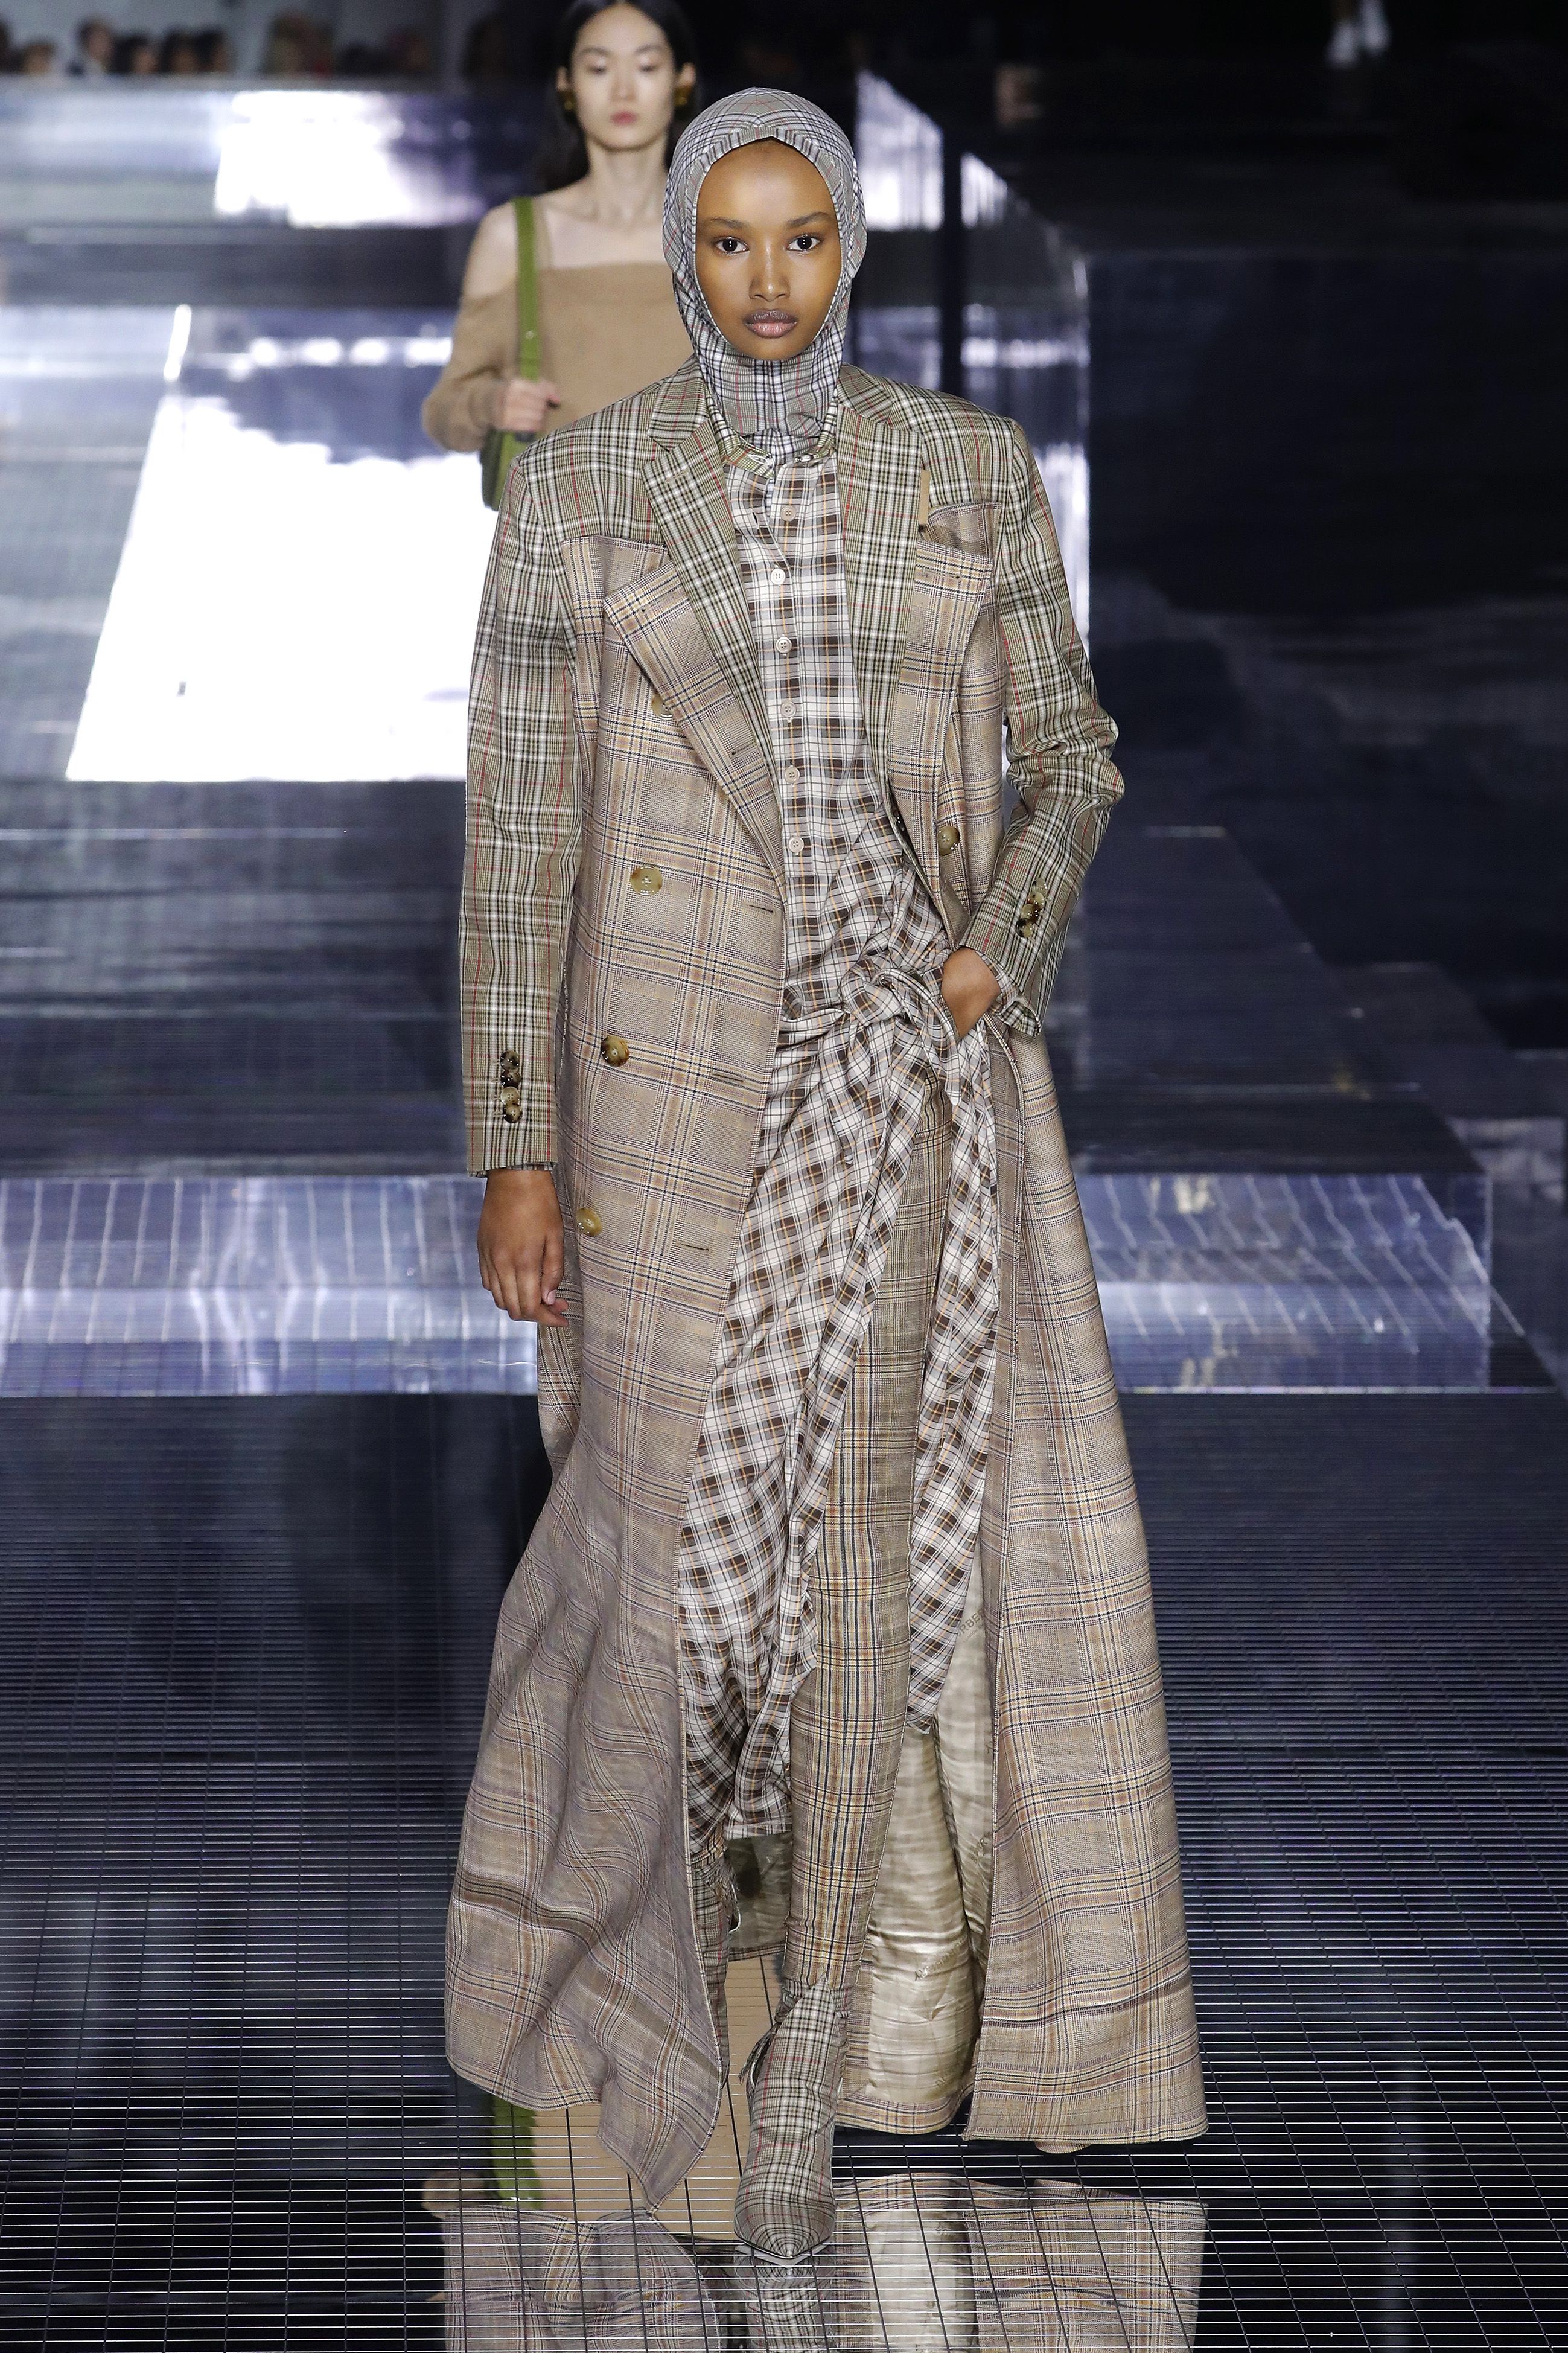 Uitrusting buitenspiegel grot Burberry, JW Anderson, Erdem, and More: The Best Looks from London Fashion  Week Fall 2020